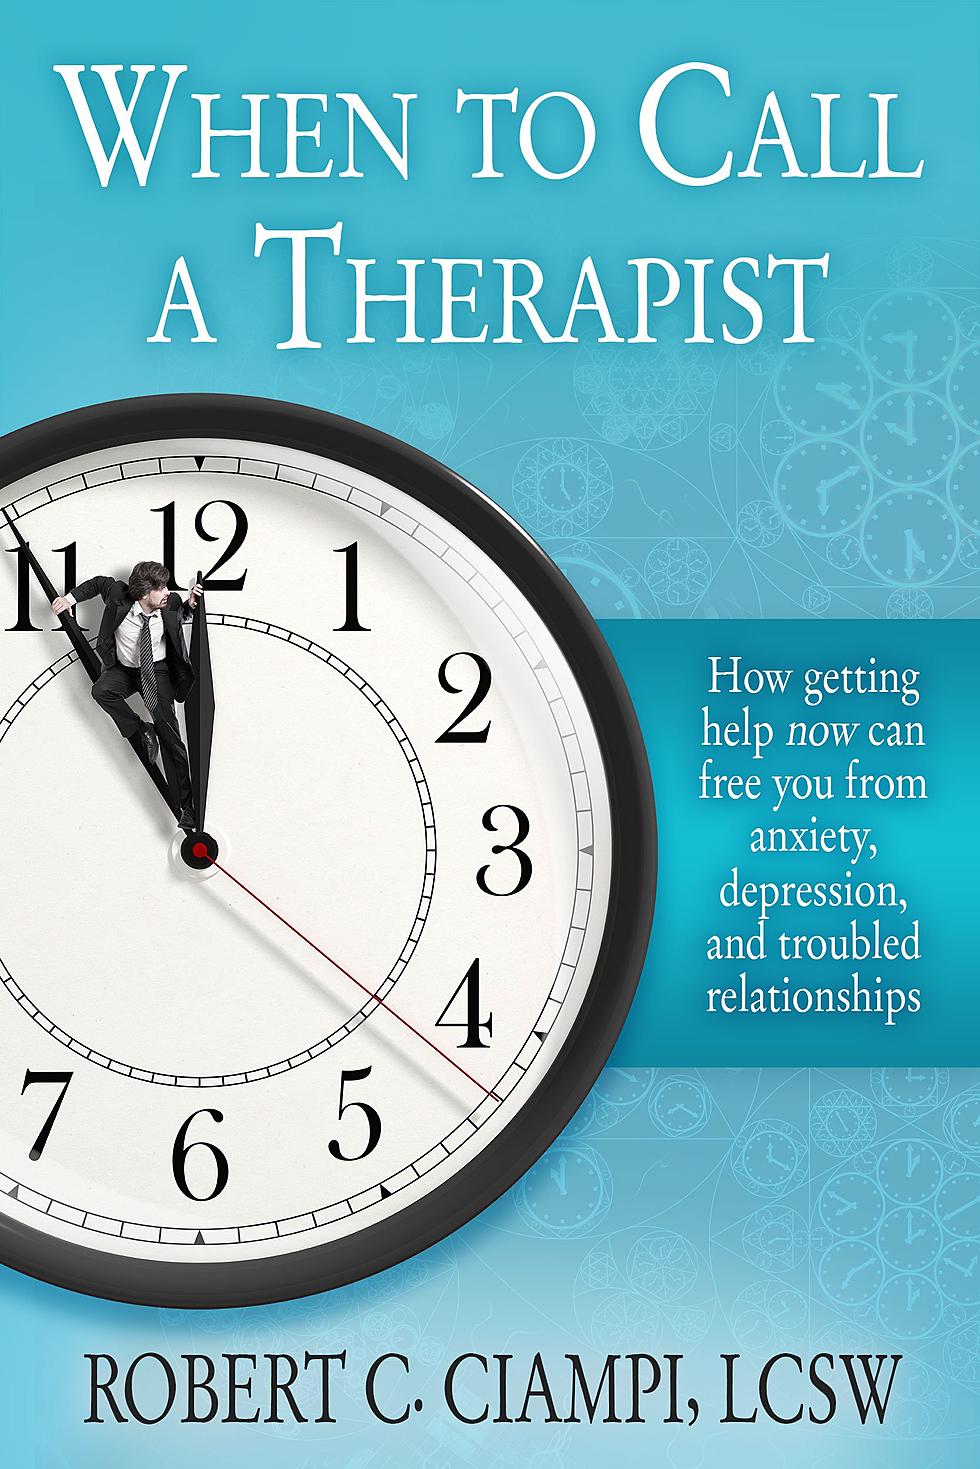 New book says see a therapist sooner, not later